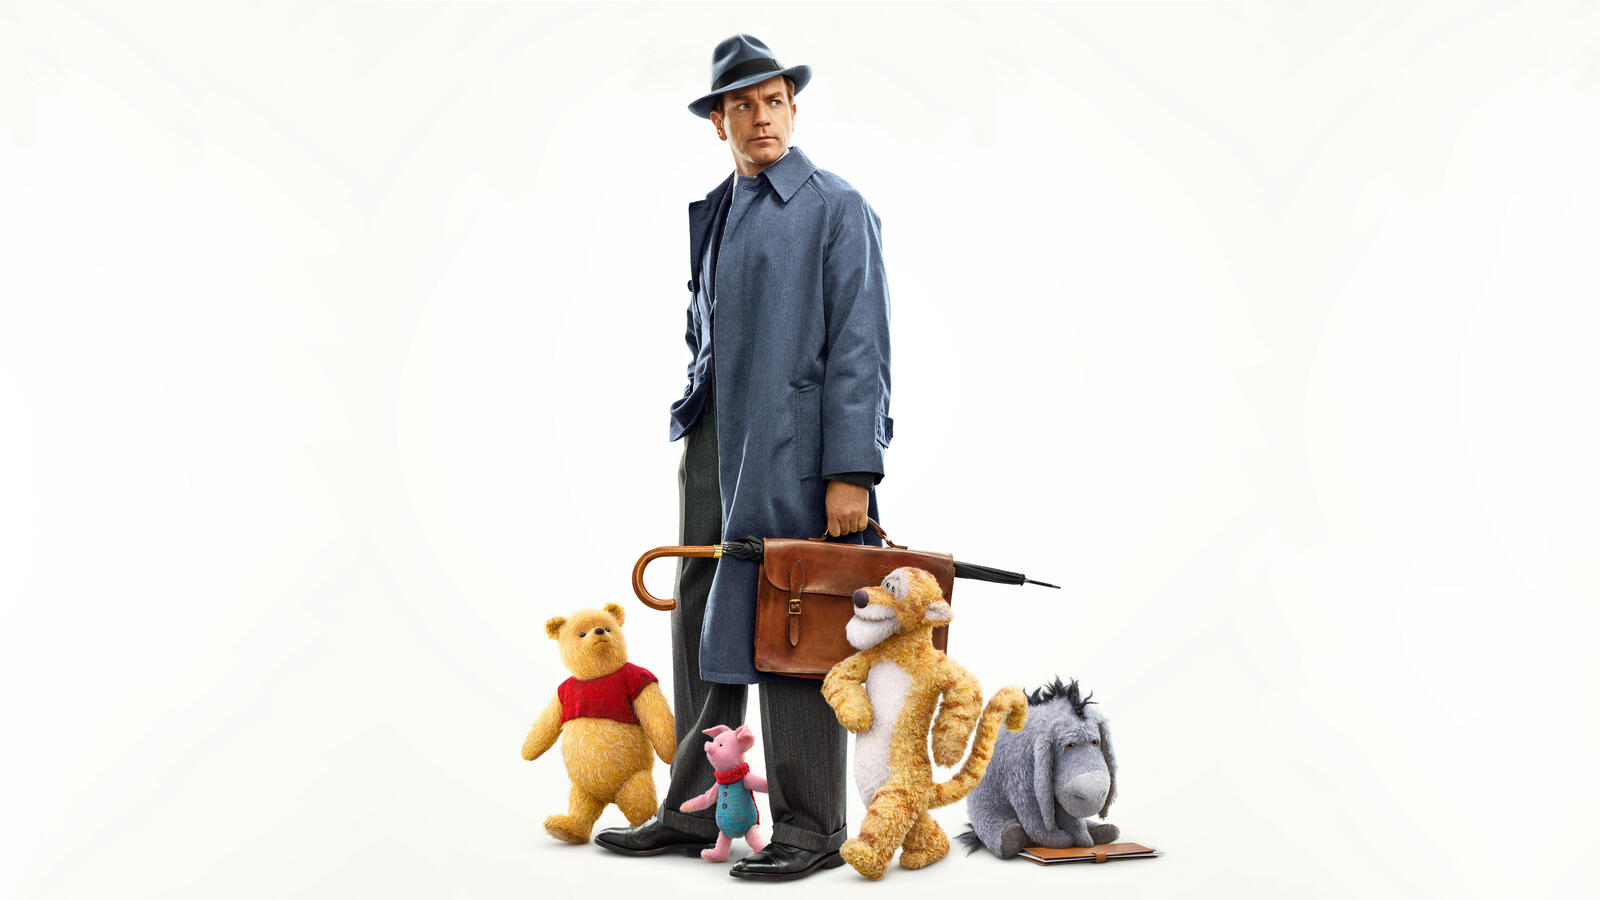 Wallpapers disney movies Christopher Robin on the desktop